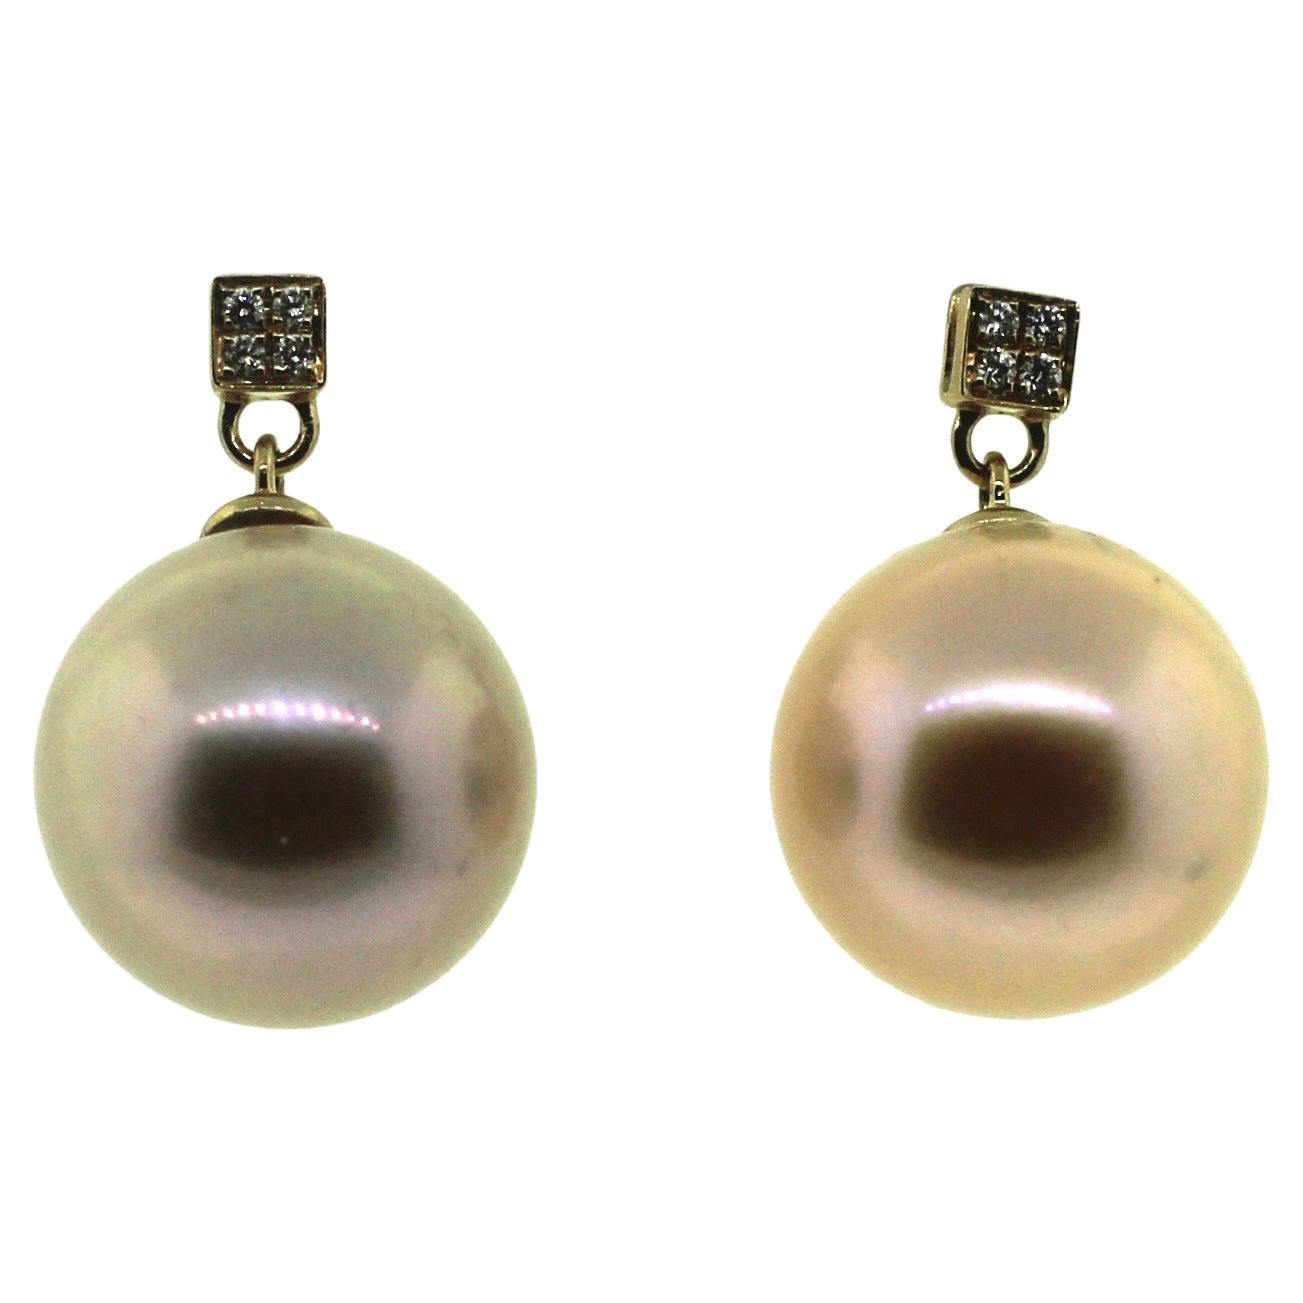 Hakimoto By Jewel Of Ocean
18K Yellow Gold With Diamonds
Total item weight 6.0 grams
12 mm Cultured Pearls
18K Yellow Gold High Polish
Orient: Very Good
Luster: Very Good
Nacre: Very Good